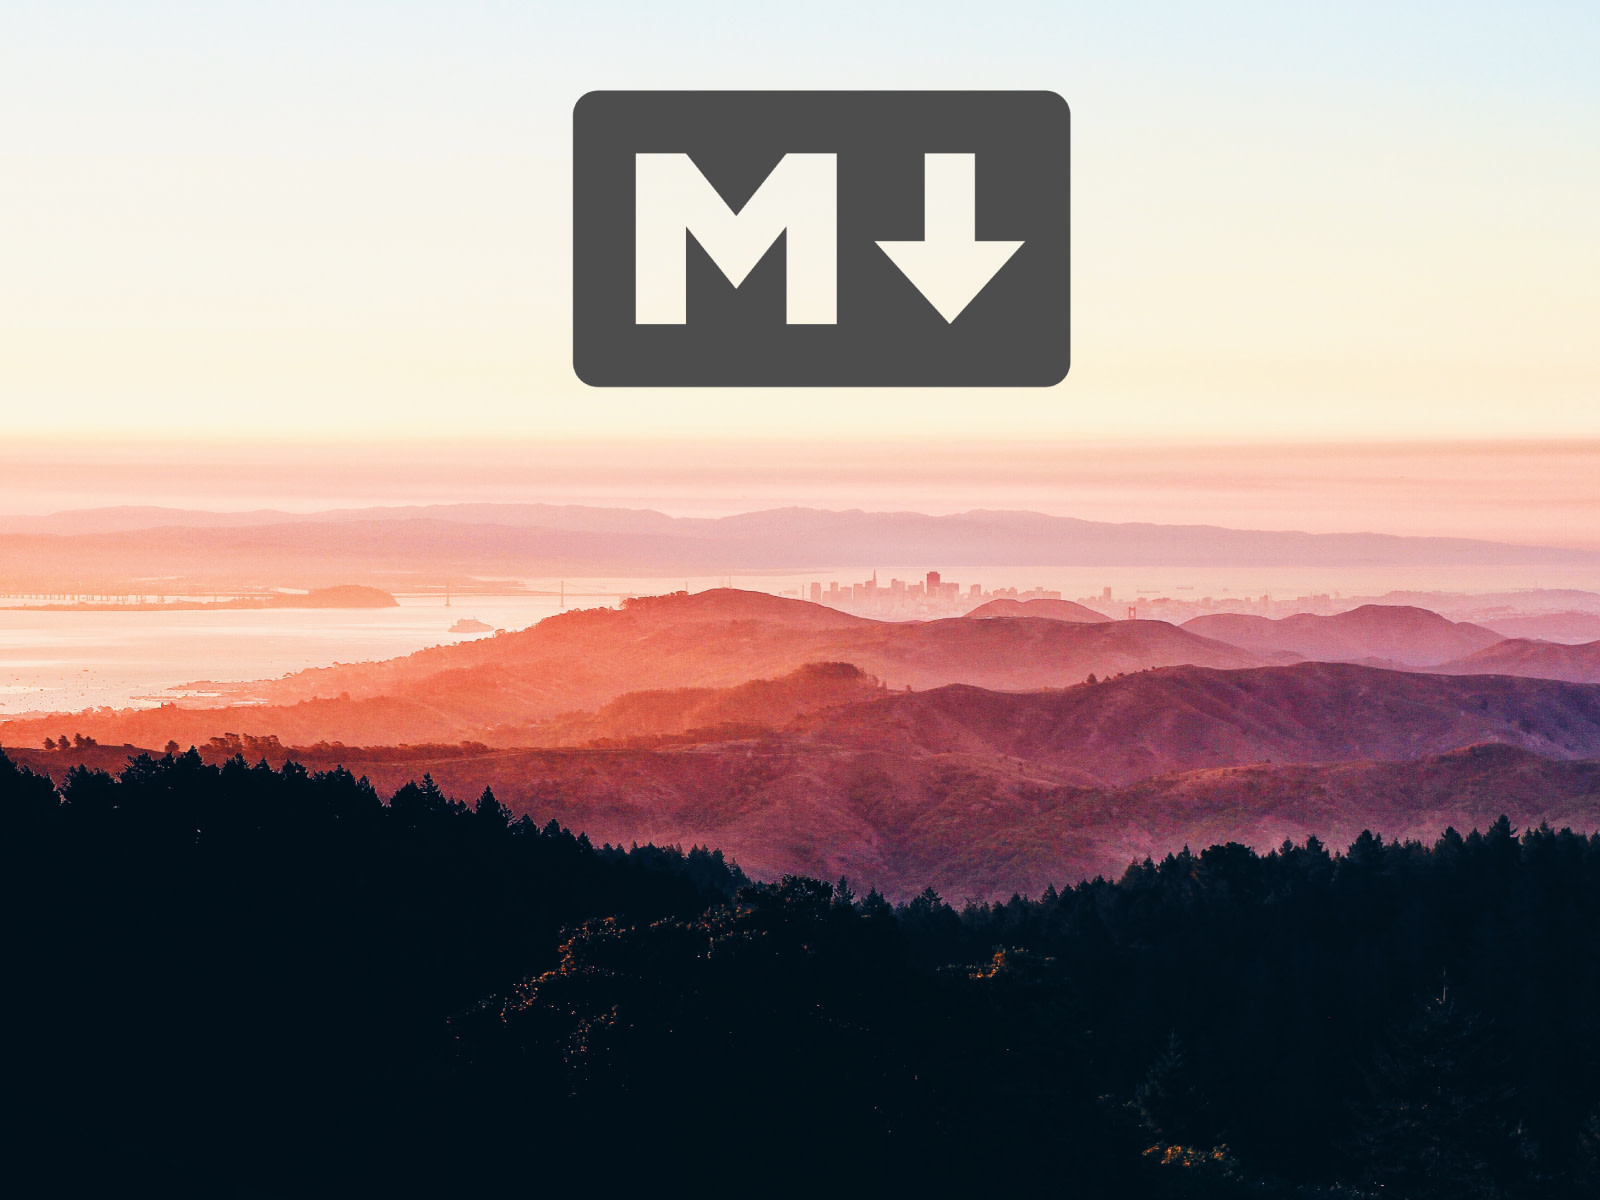 Forest, hills, ocean and city at sunrise with markdown logo.